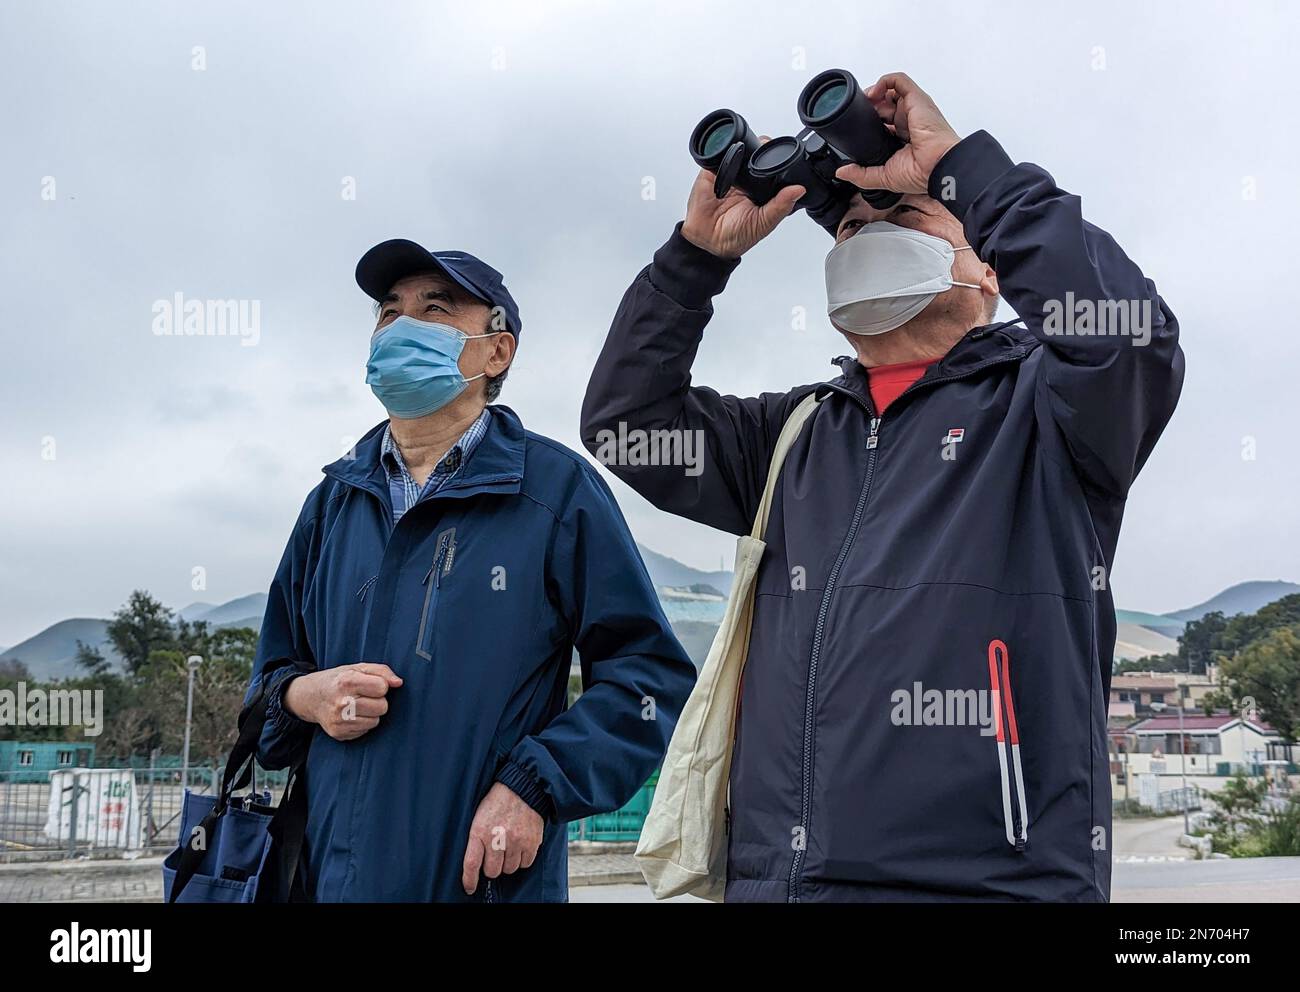 Lim Kian-sang (R), 69, and his friend stepped off a bus outside the new Heung Yuen Wai border crossing facility, they pointed a pair of binoculars north at an apartment building across the Shenzhen border. 05FEB23 SCMP/Kahon Chan Stock Photo